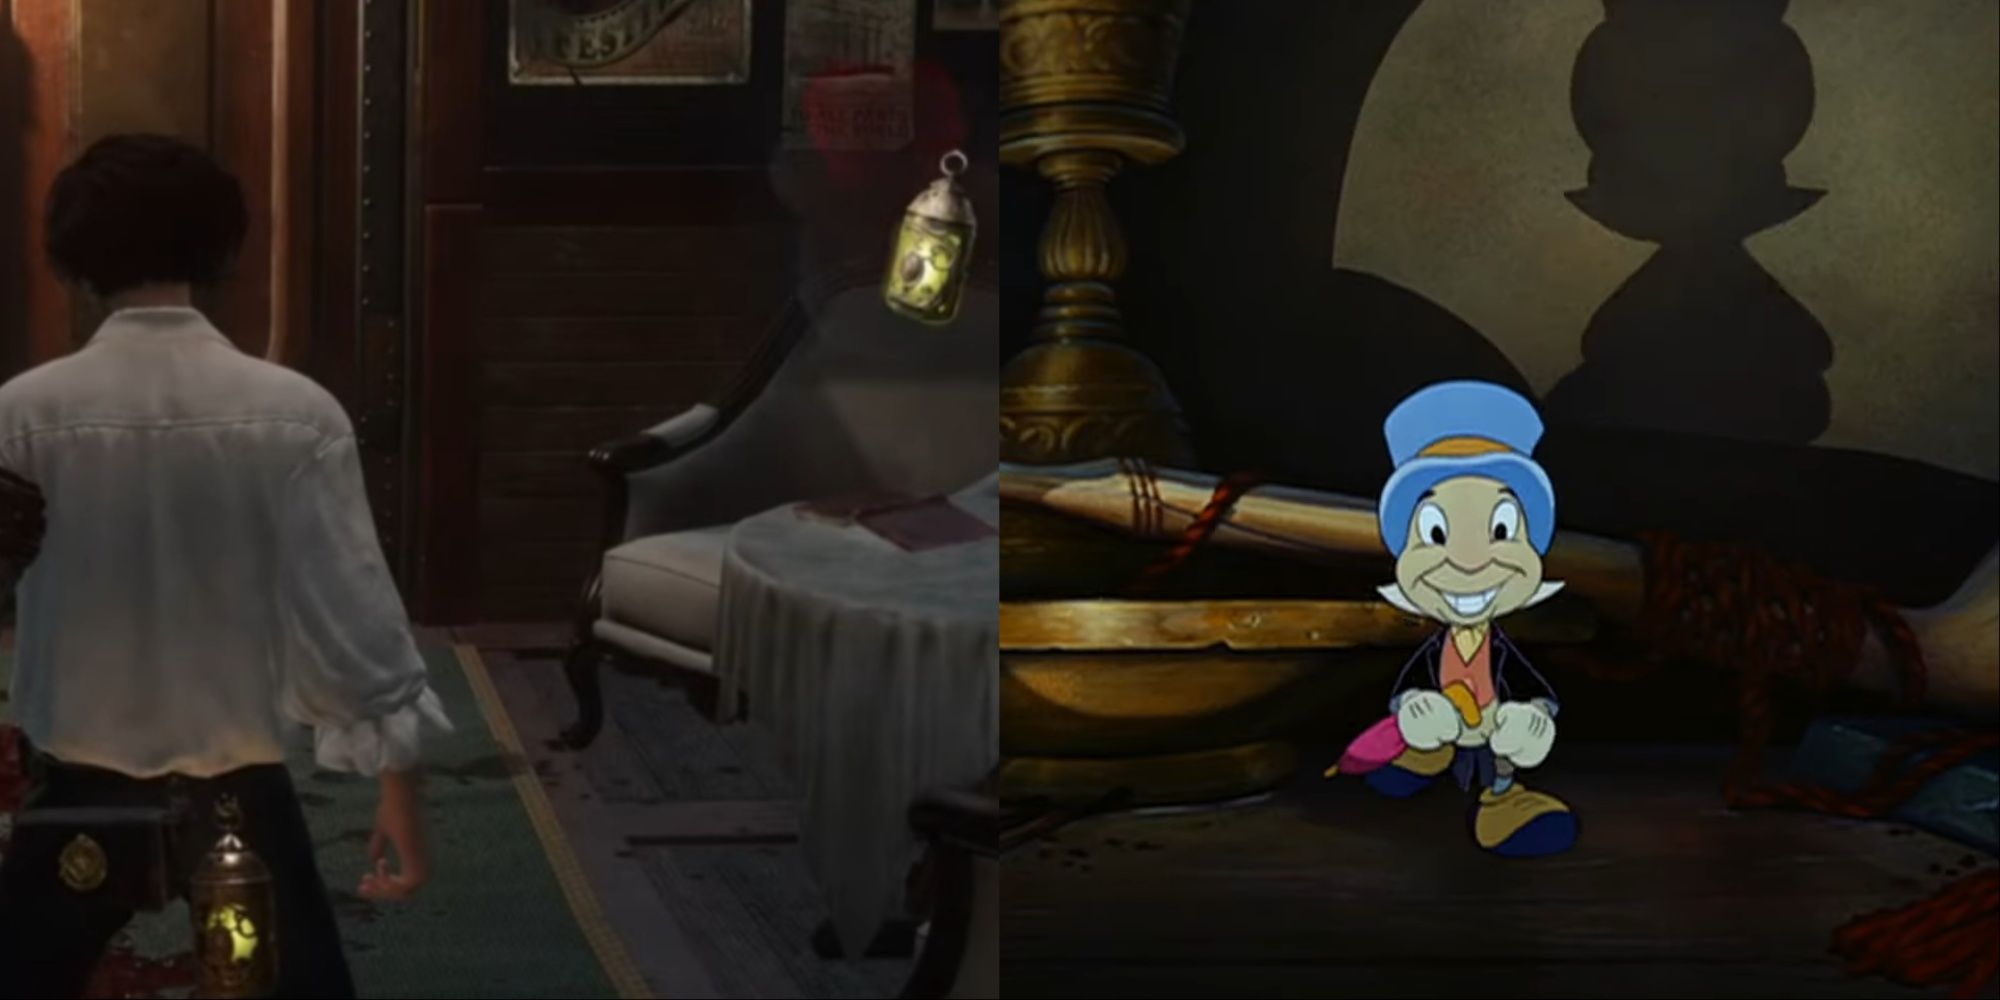 Split-image of Pinocchio with the lamp containing Gemini the cricket guide in Lies of P, and Jiminy Cricket from the animated Disney movie Pinocchio.